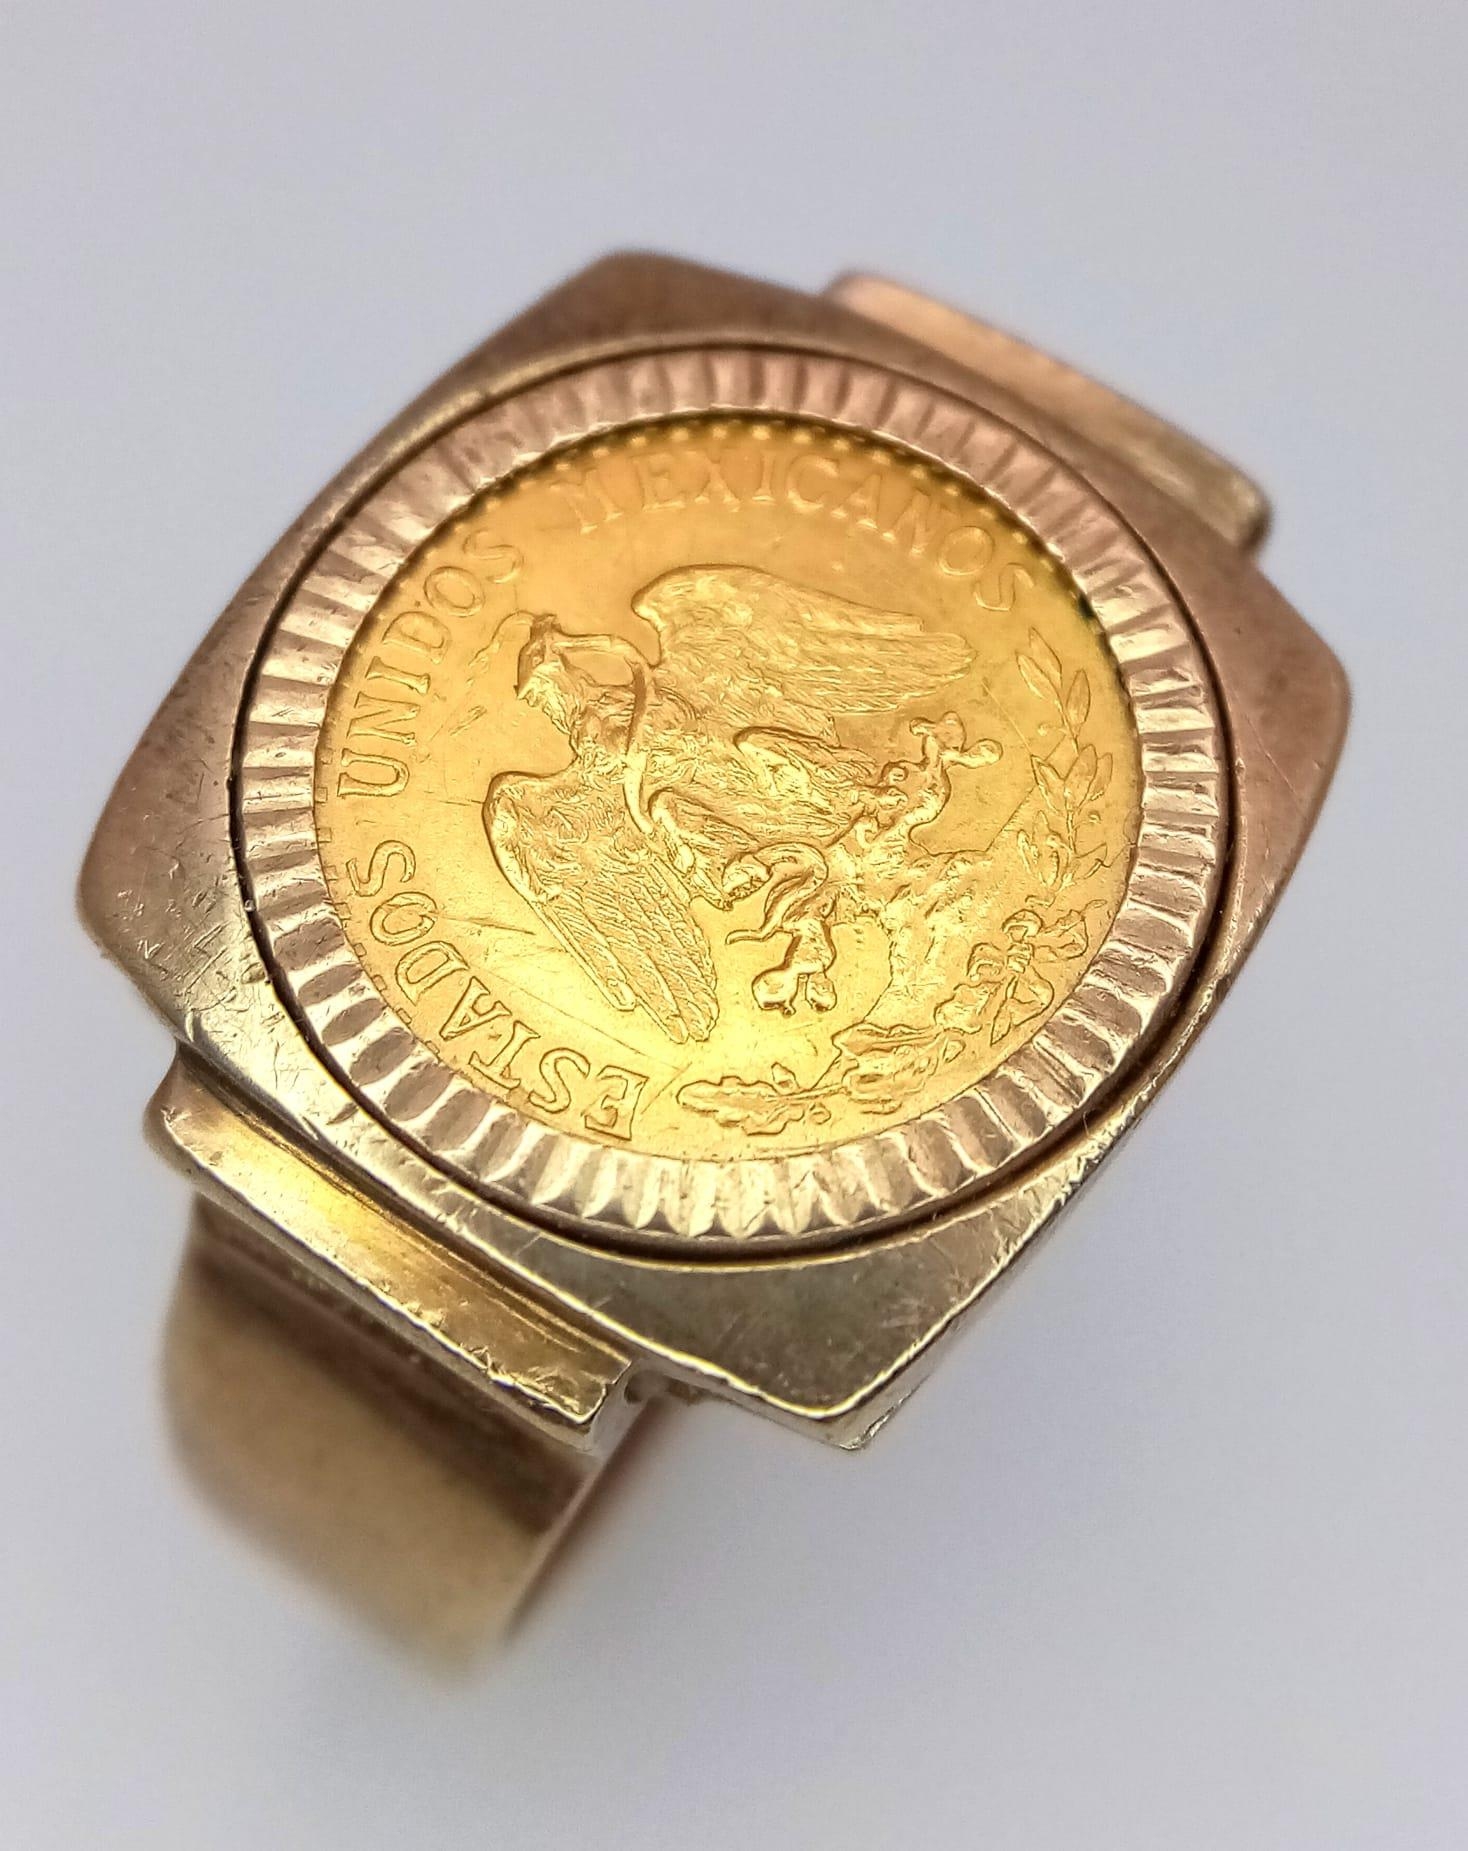 An 18K Gold Dos Pesos Mexican Coin set in a 9K Gold Ring. 6.6g total weight. Size R. - Image 2 of 4